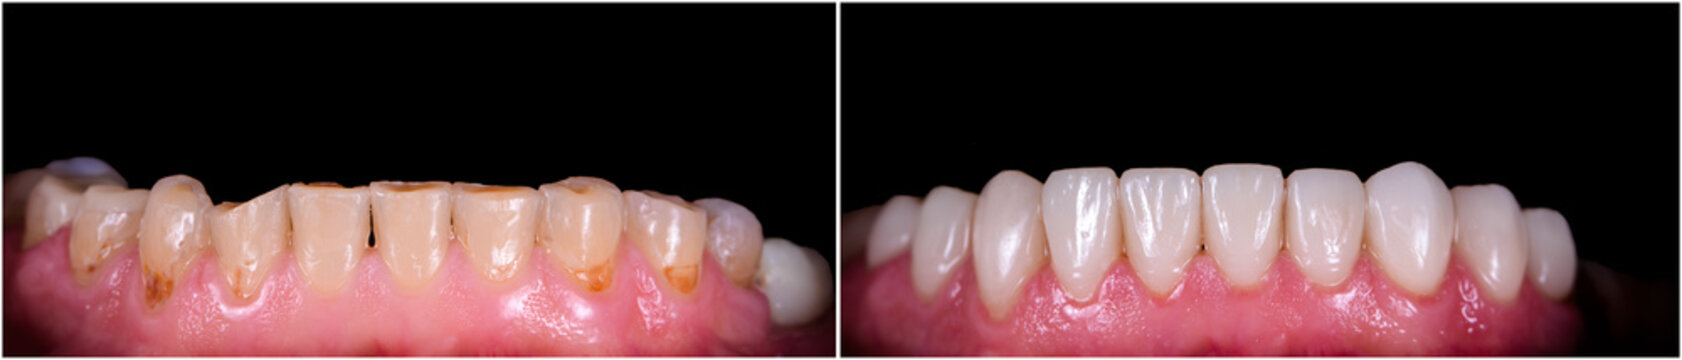 full mought recovery by press ceramic crowns and implants